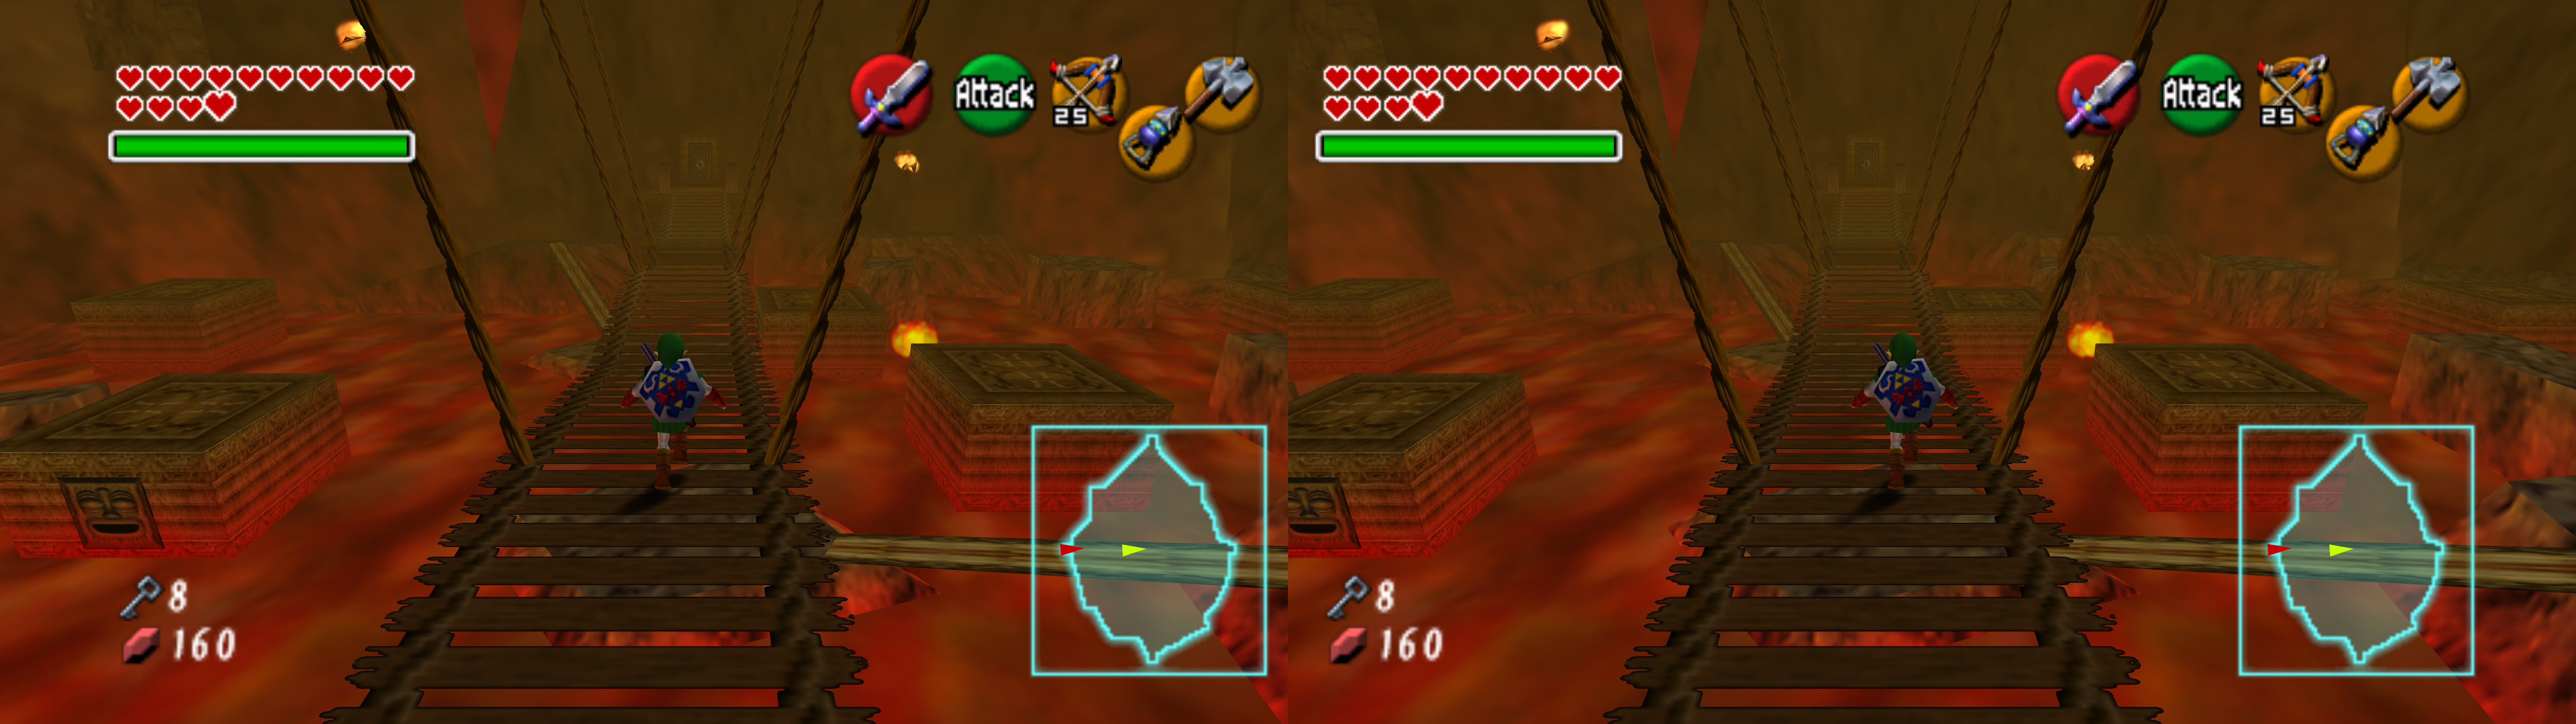 The Legend Of Zelda: Ocarina Of Time' PC port now supports 60FPS